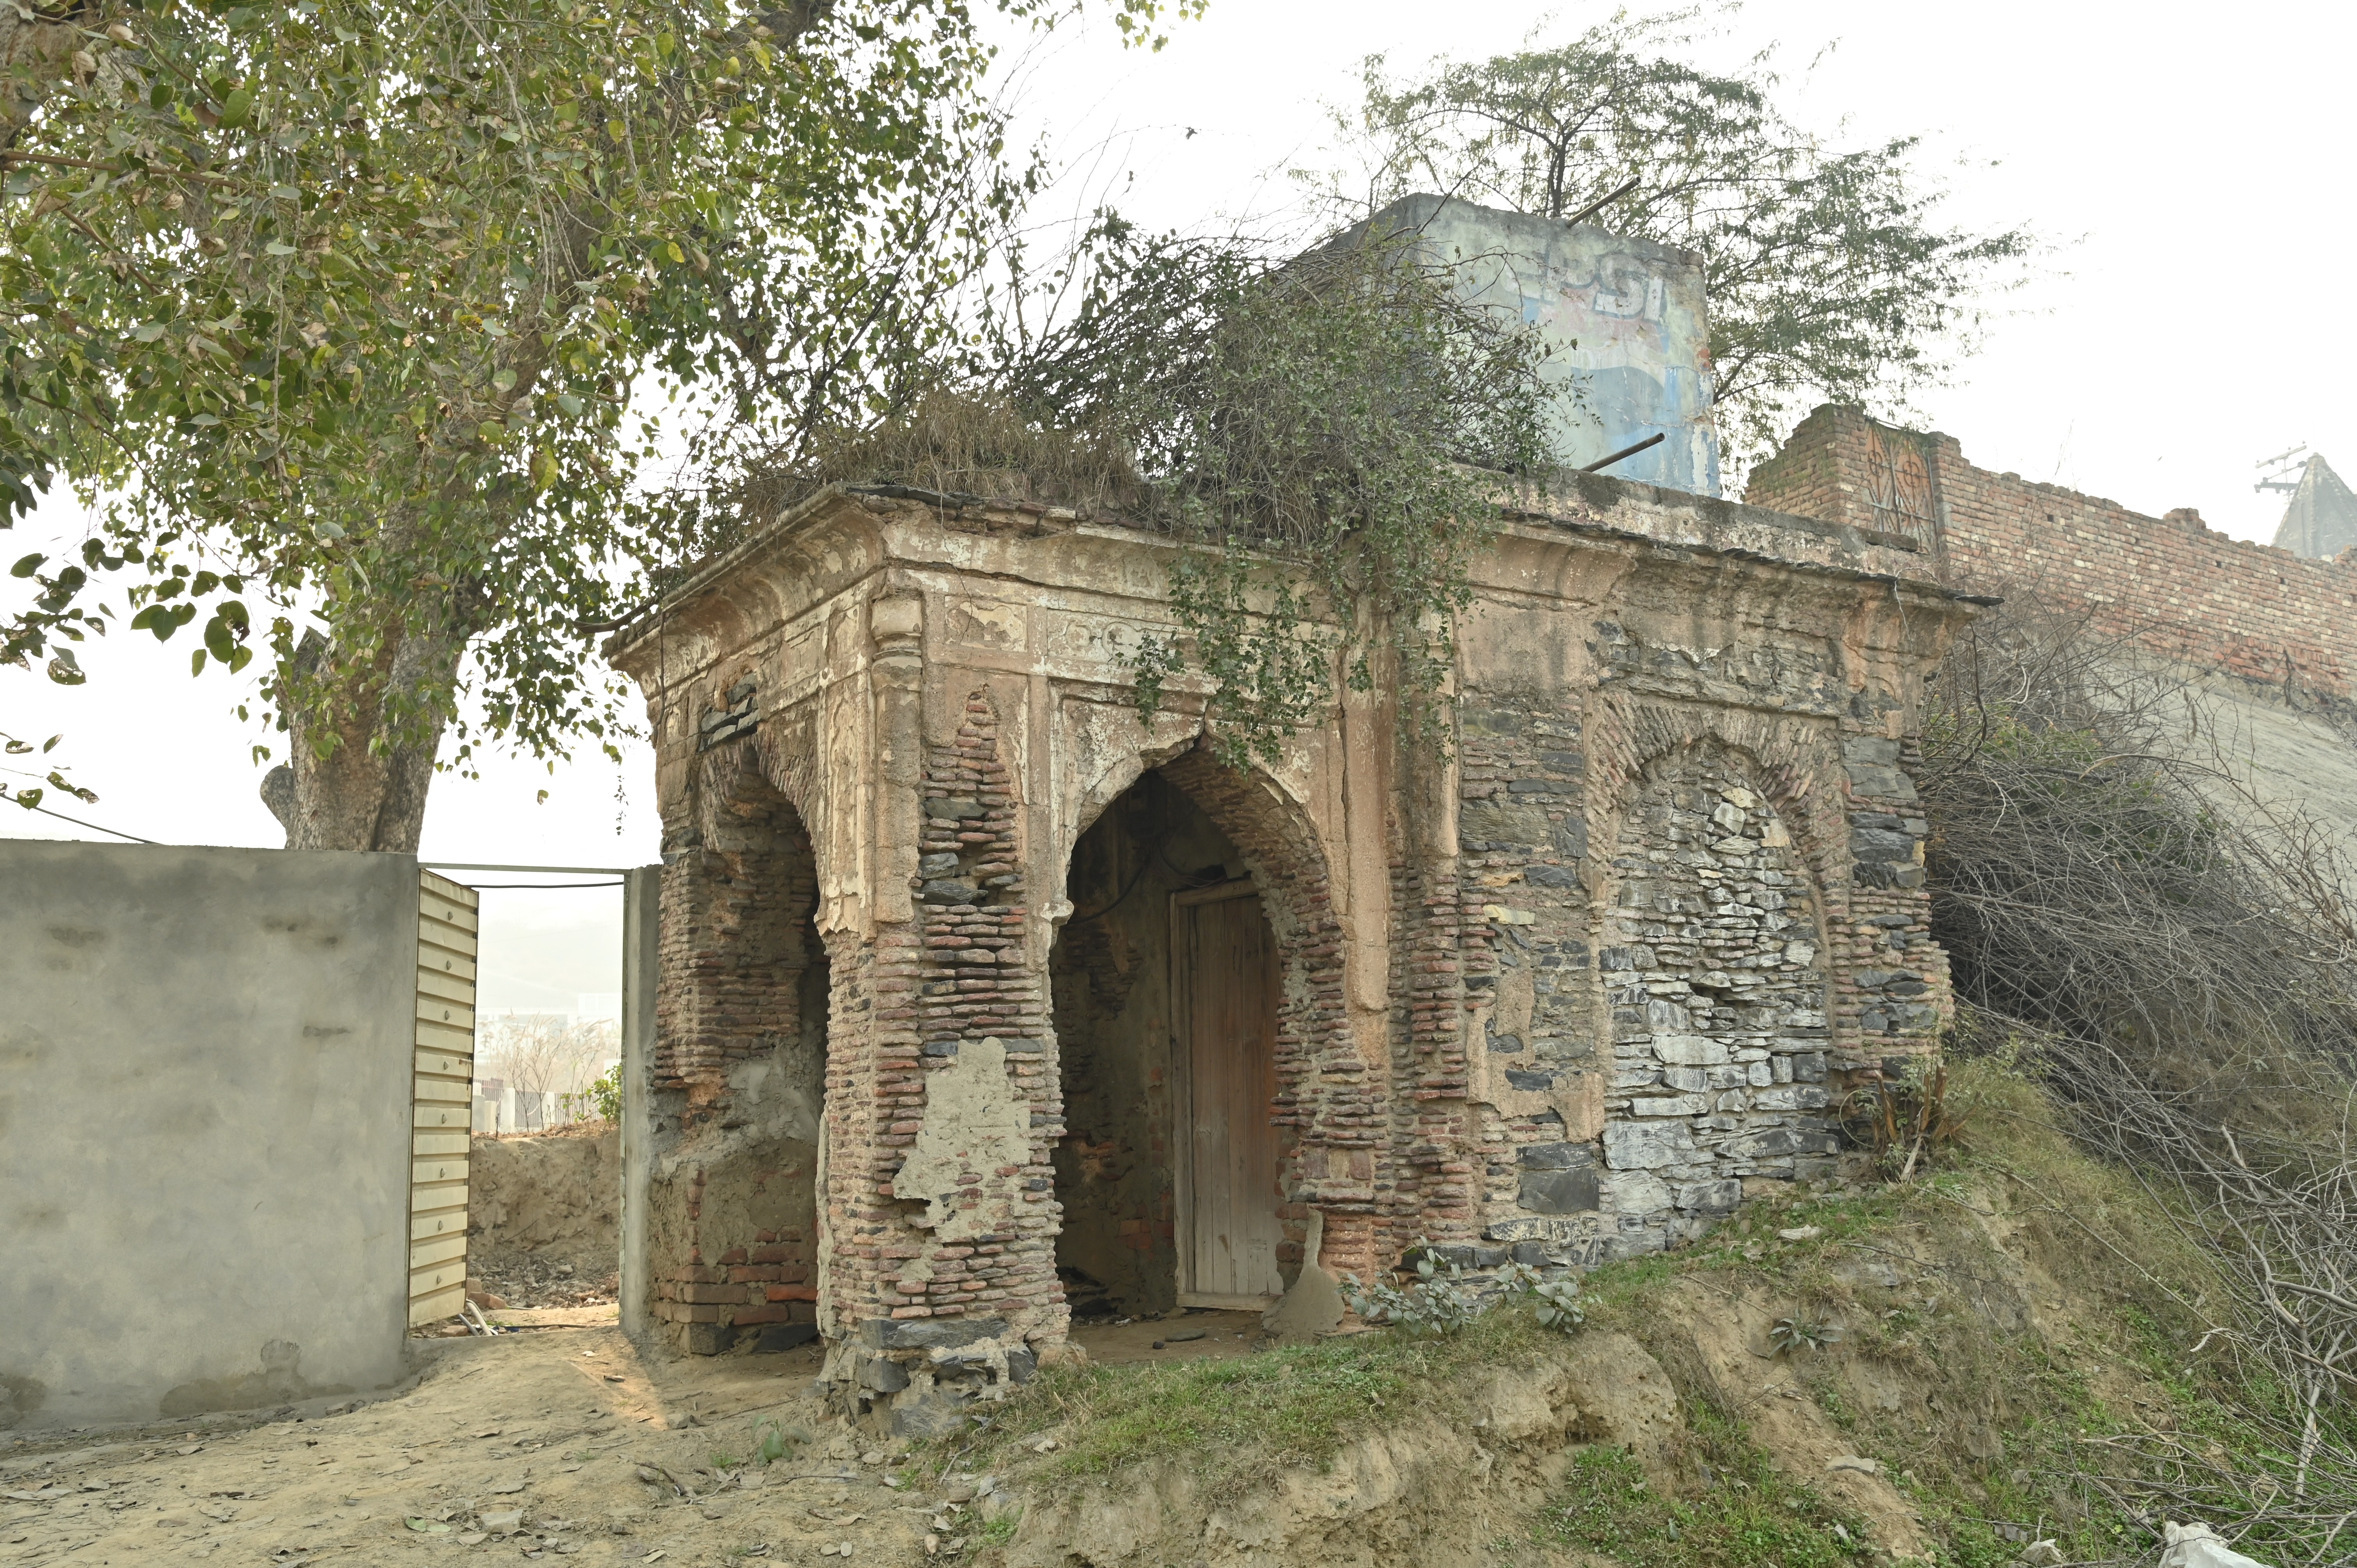 The deteriorated and crumbling beauty of the ancient structure near The Attock Tomb